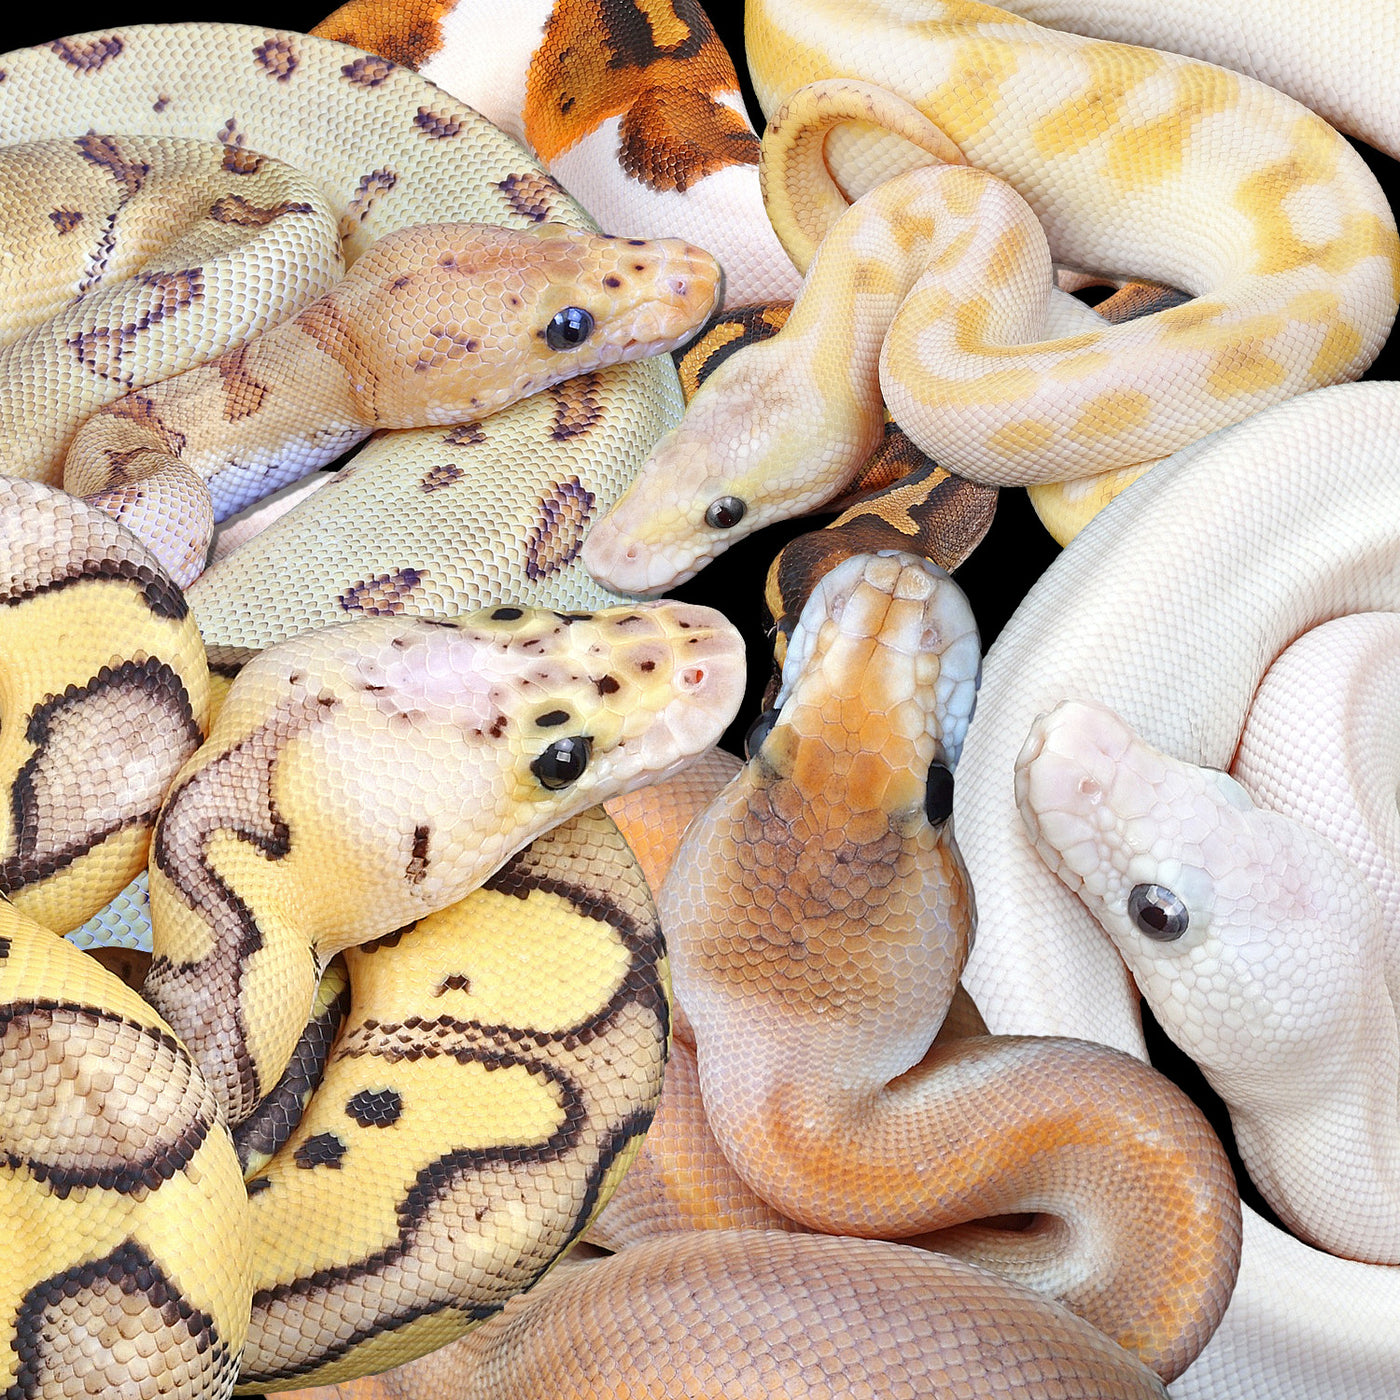 Learn More about Ball Python Snakes